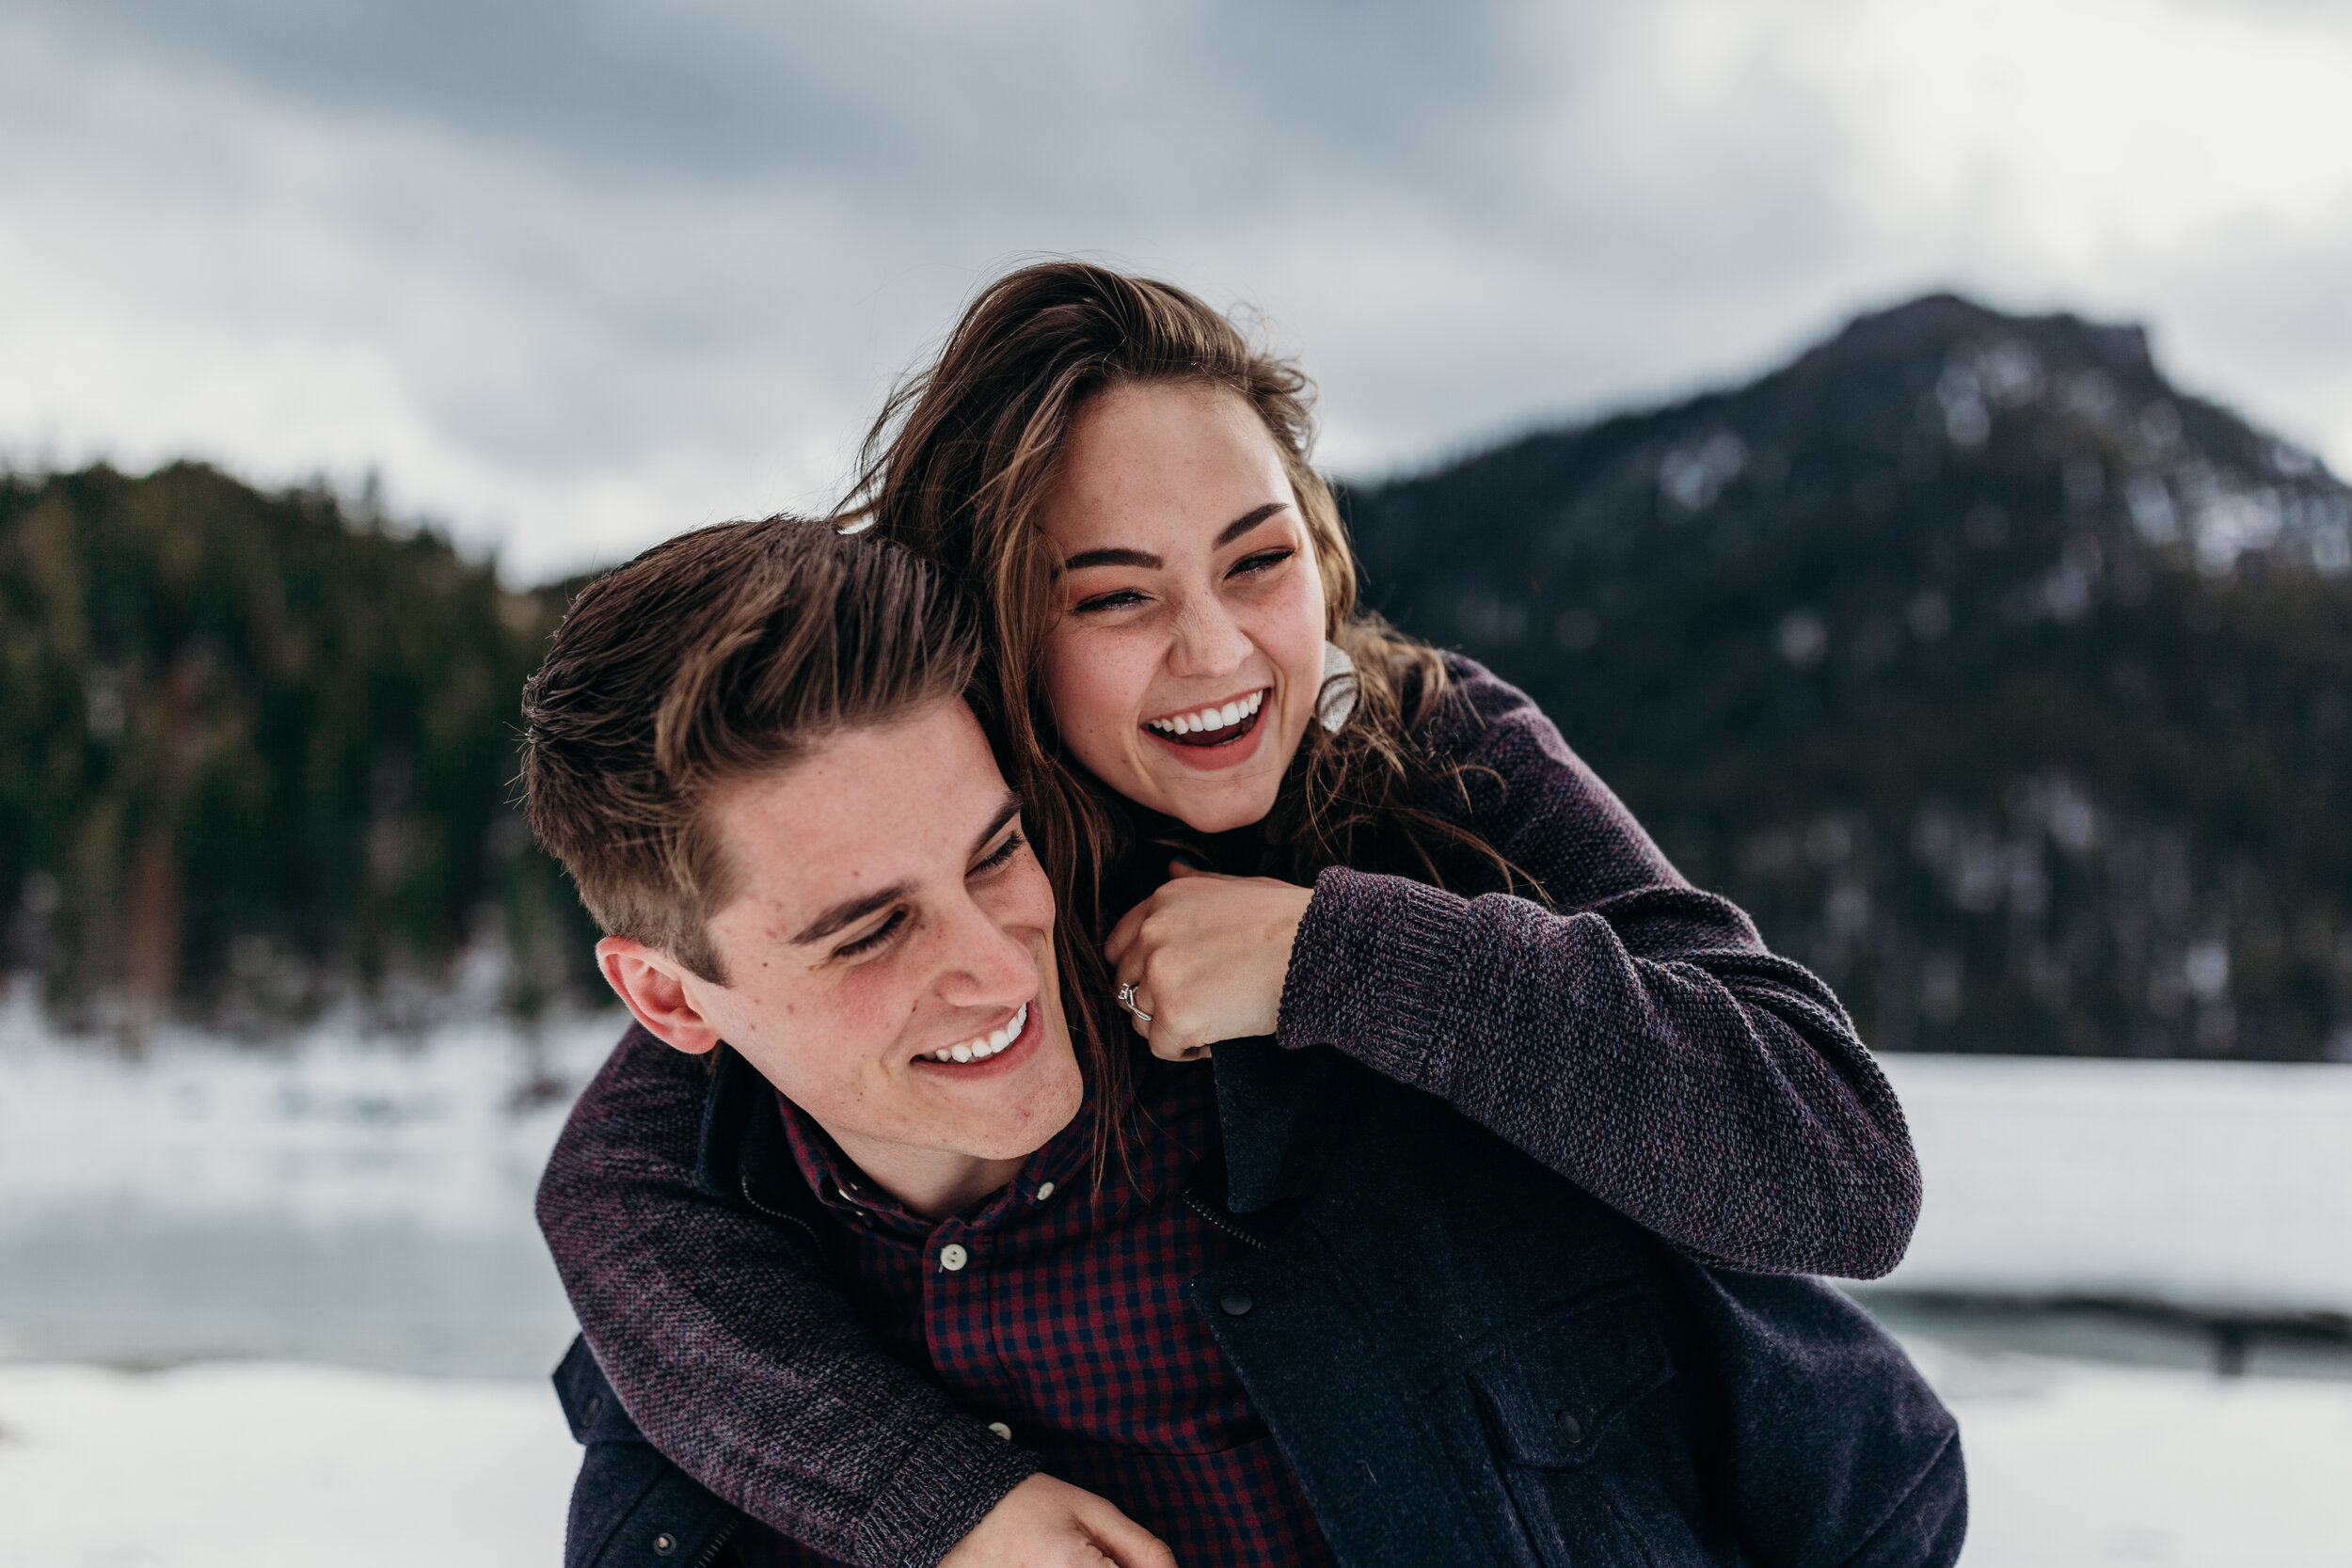 Snowy winter mountain engagements windy hair pine trees laughing couple shoot #coupleshoot #utahphotographer #weddingphotographer #engagements #engagementshoot #winterengagements piggy back